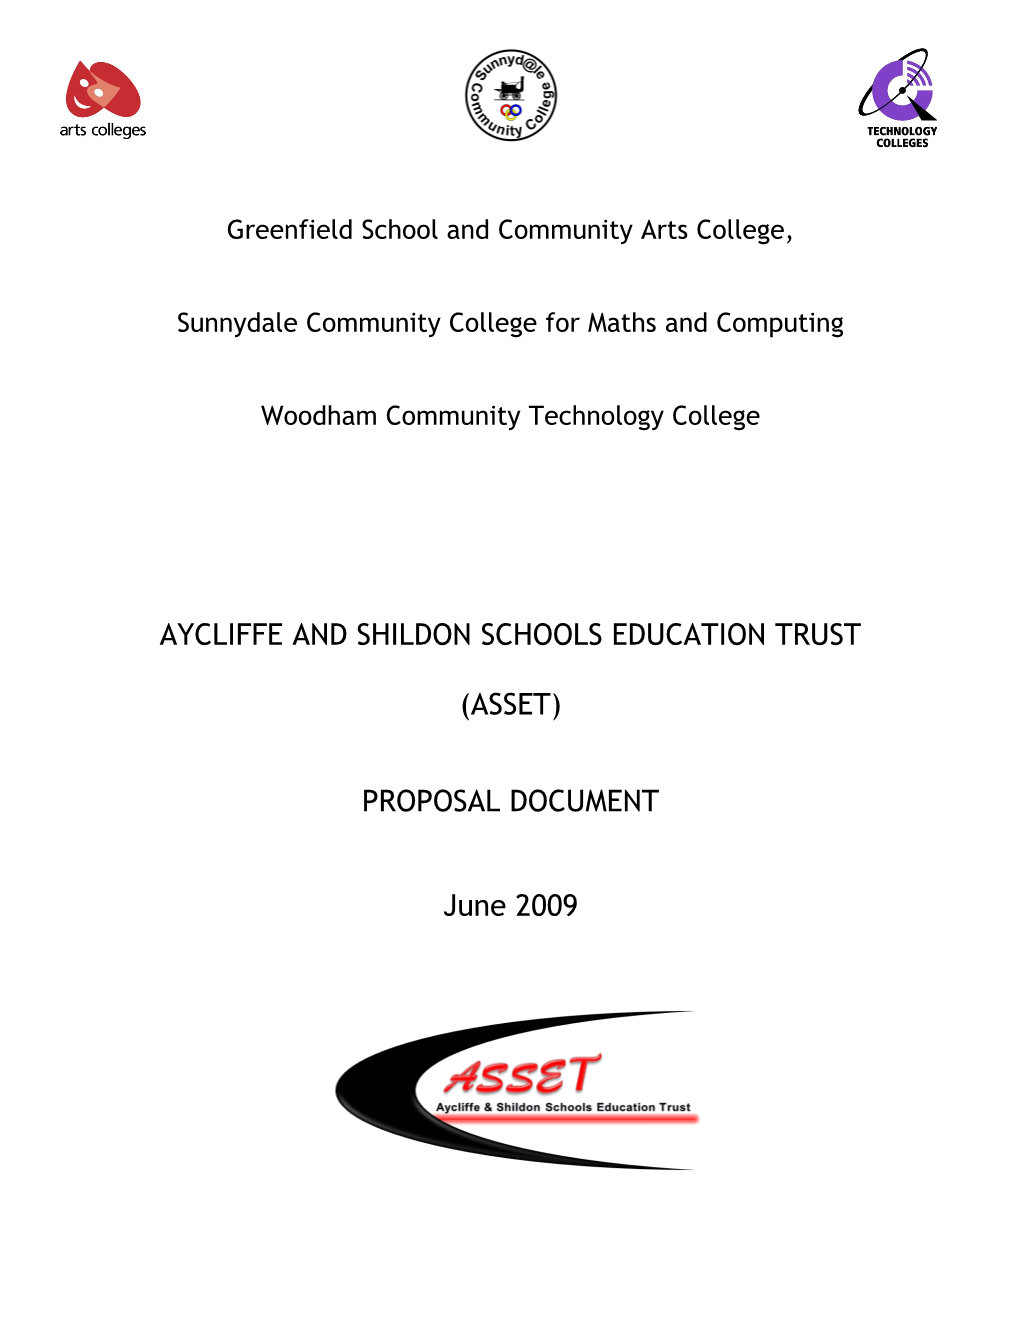 Sunnydalecommunity College for Maths and Computing